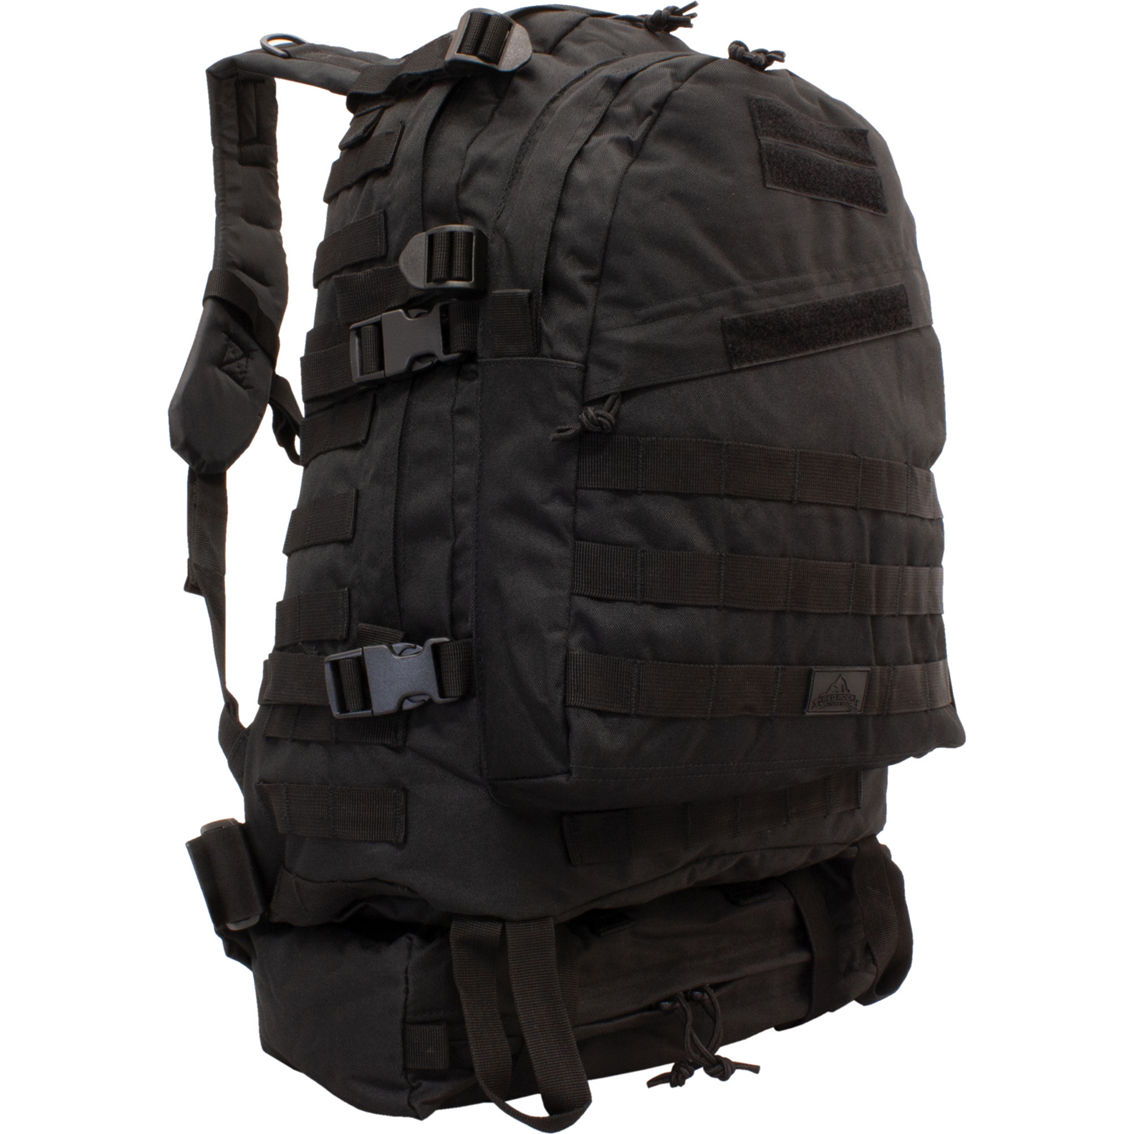 Red Rock Outdoor Gear Engagement Pack - Image 3 of 6